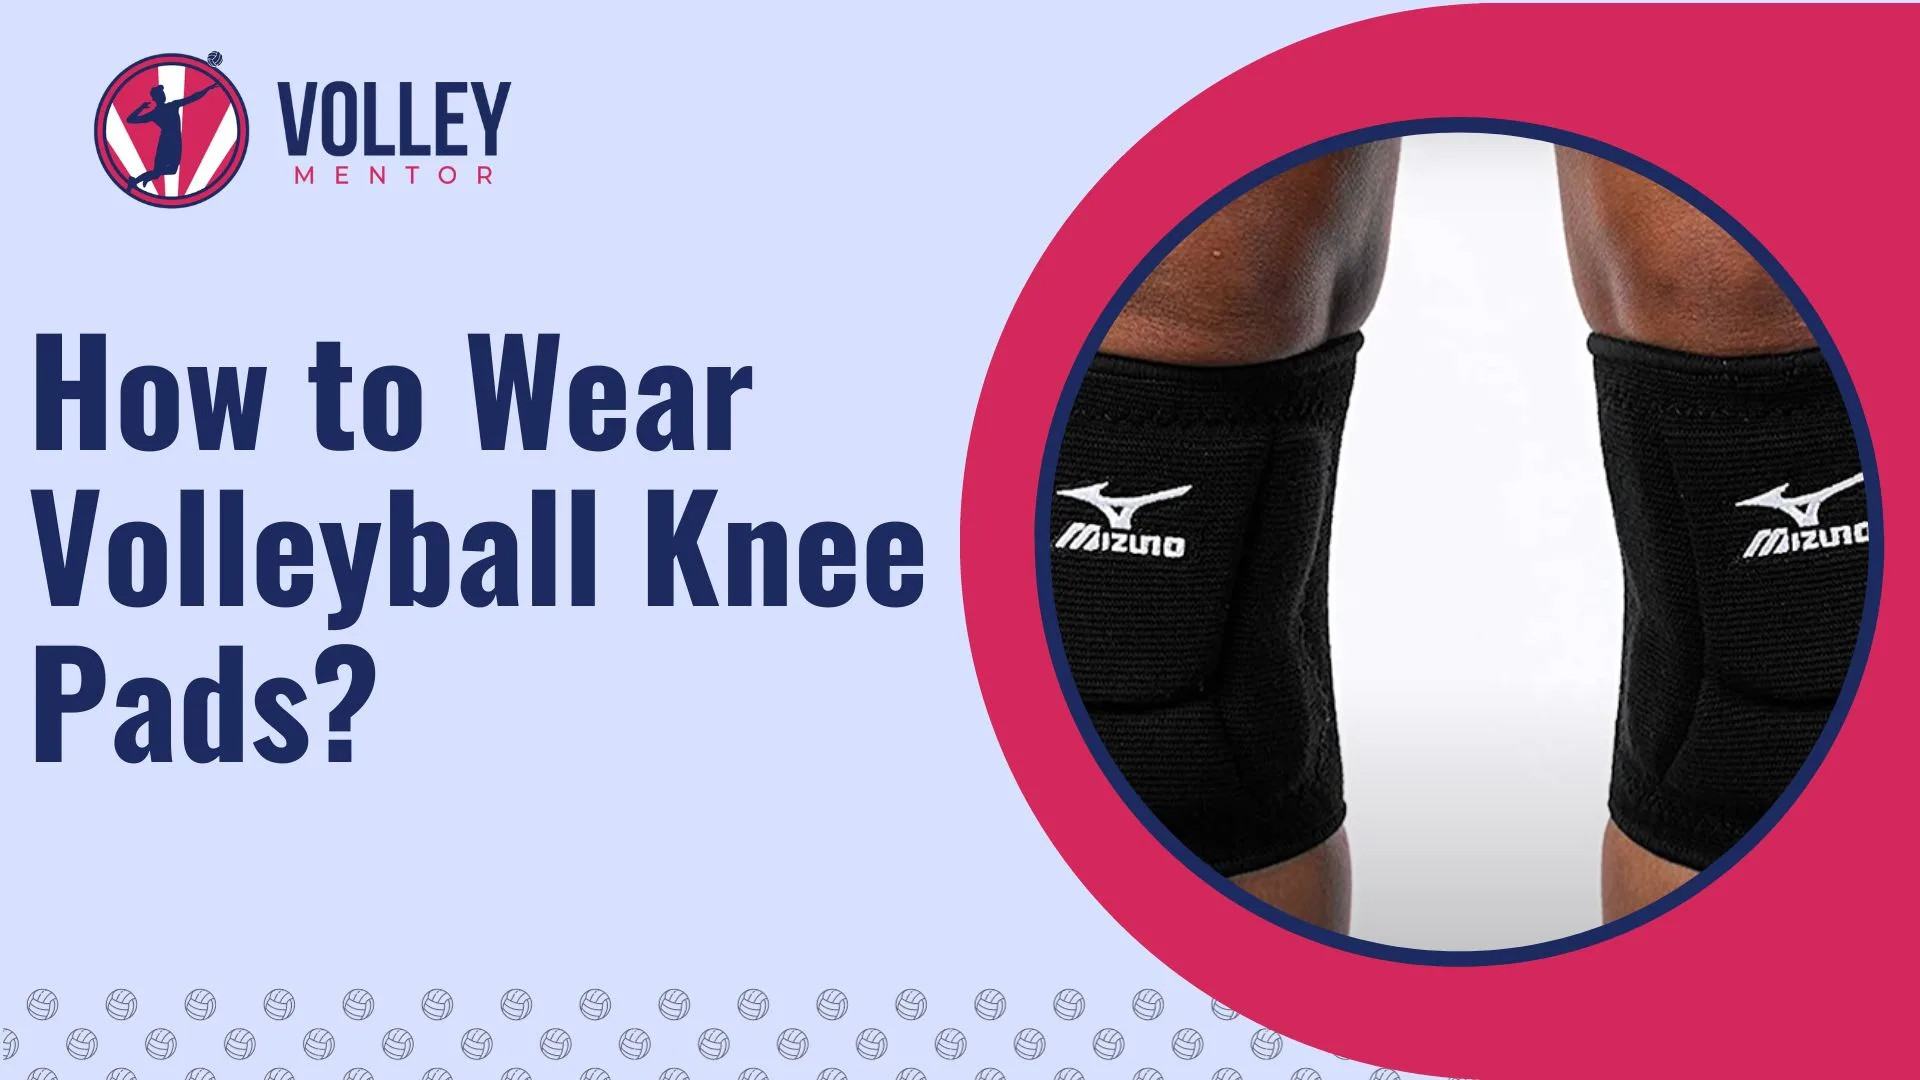 How to wear Volleyball Knee Pads